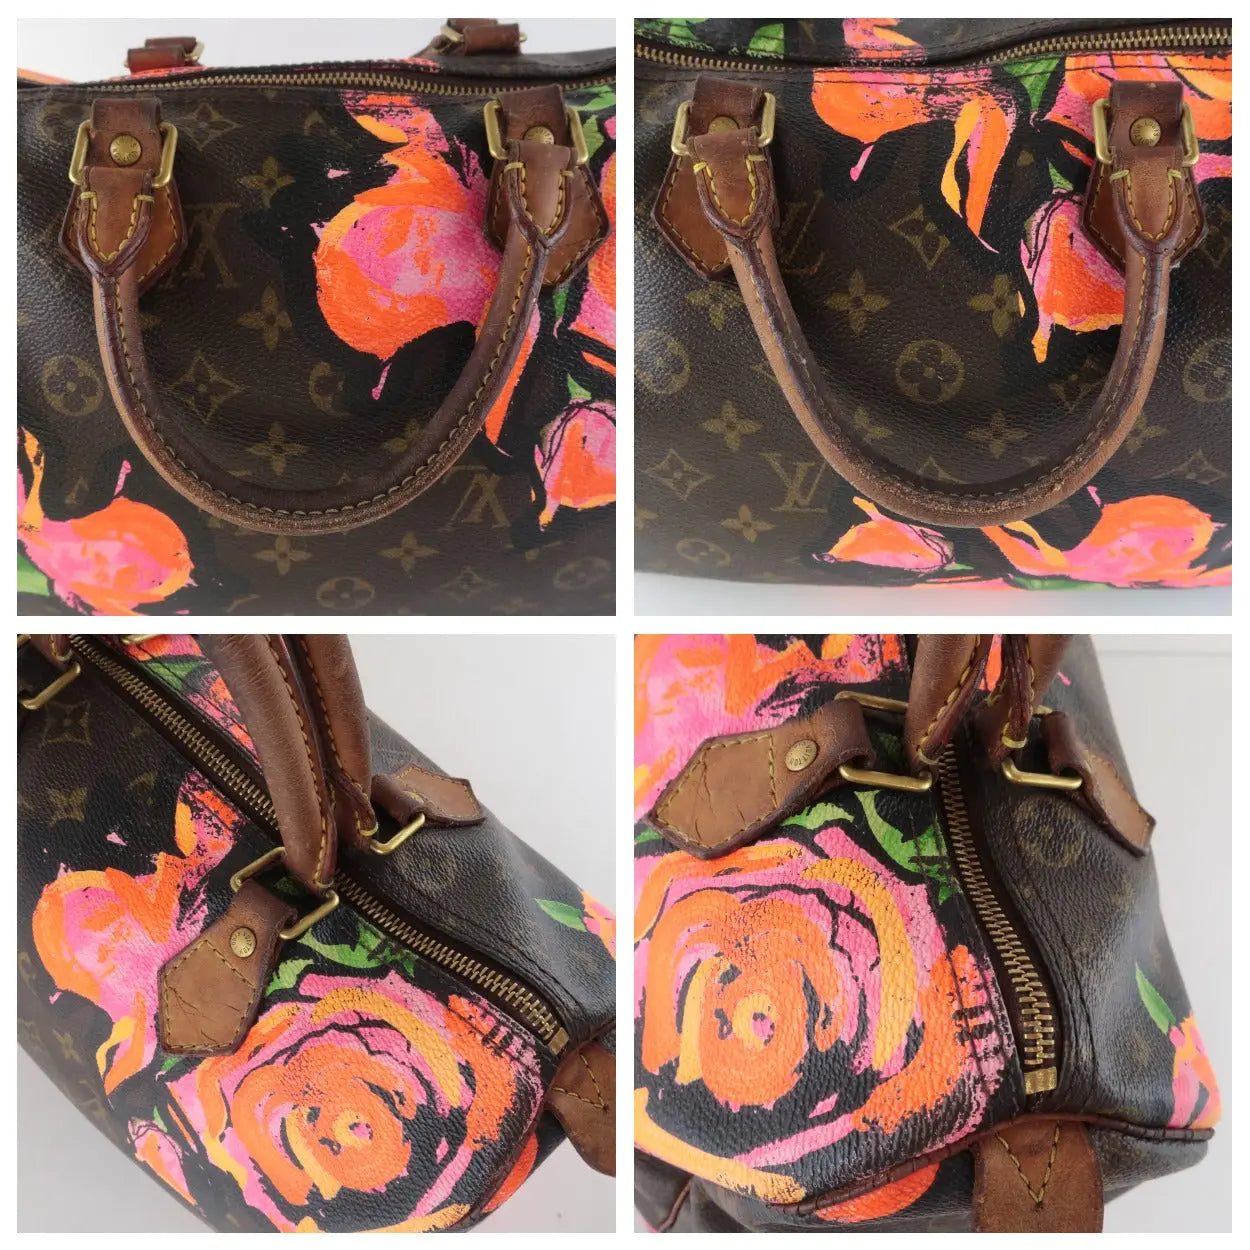 Siopaella Ltd. - We LOVE limited edition Louis Vuitton😍😍 Check out this Louis  Vuitton X Stephen Sprouse Limited Edition Monogram Canvas Floral Print “ Neverfull” MM Tote online or in store, open 10-6pm